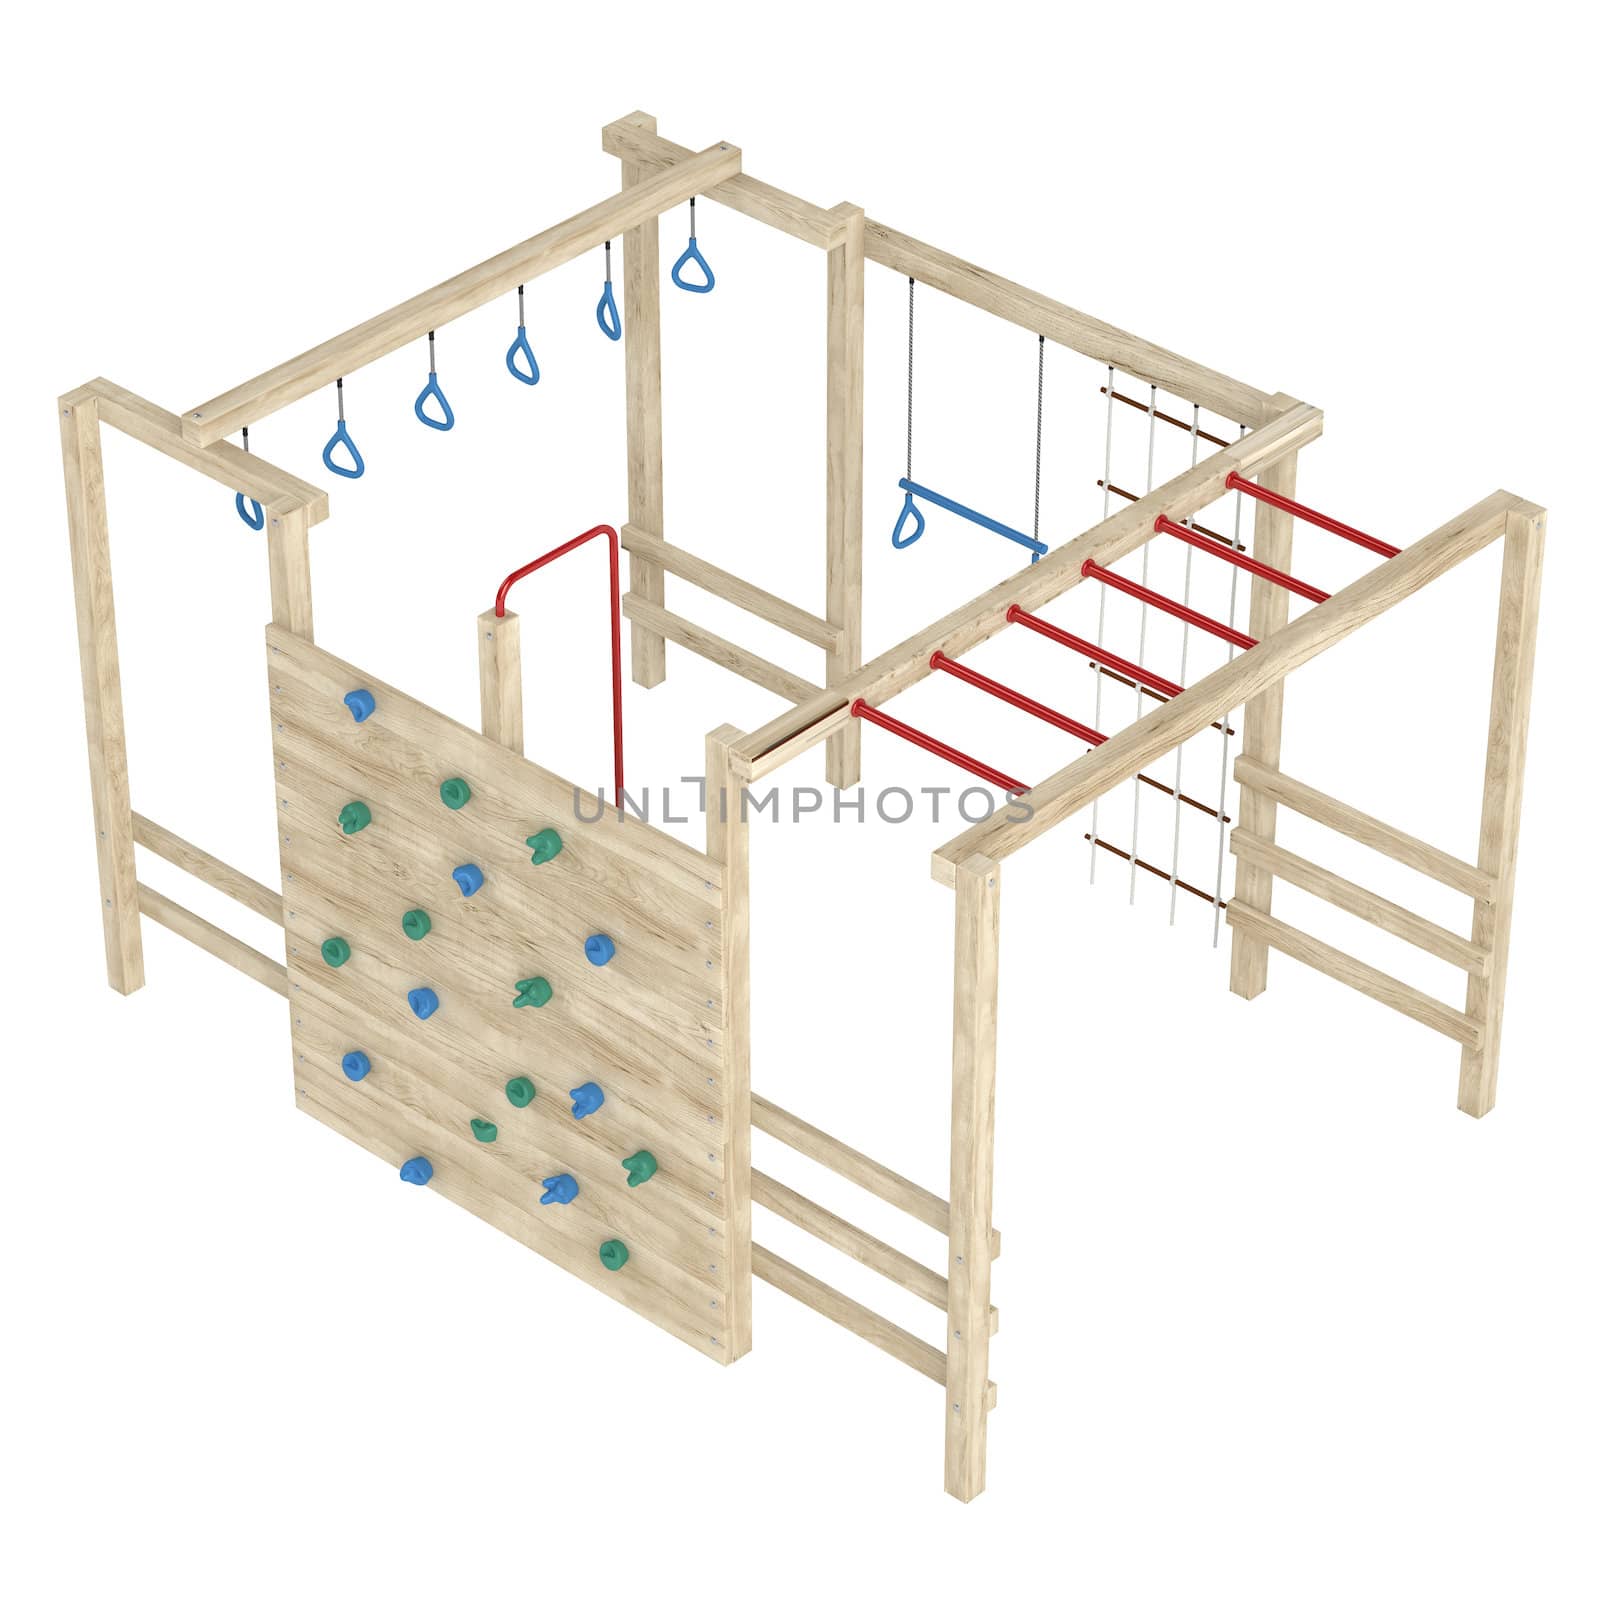 Wooden jungle gym or climbing frame with handholds, footholds and ropes isolated on a white background